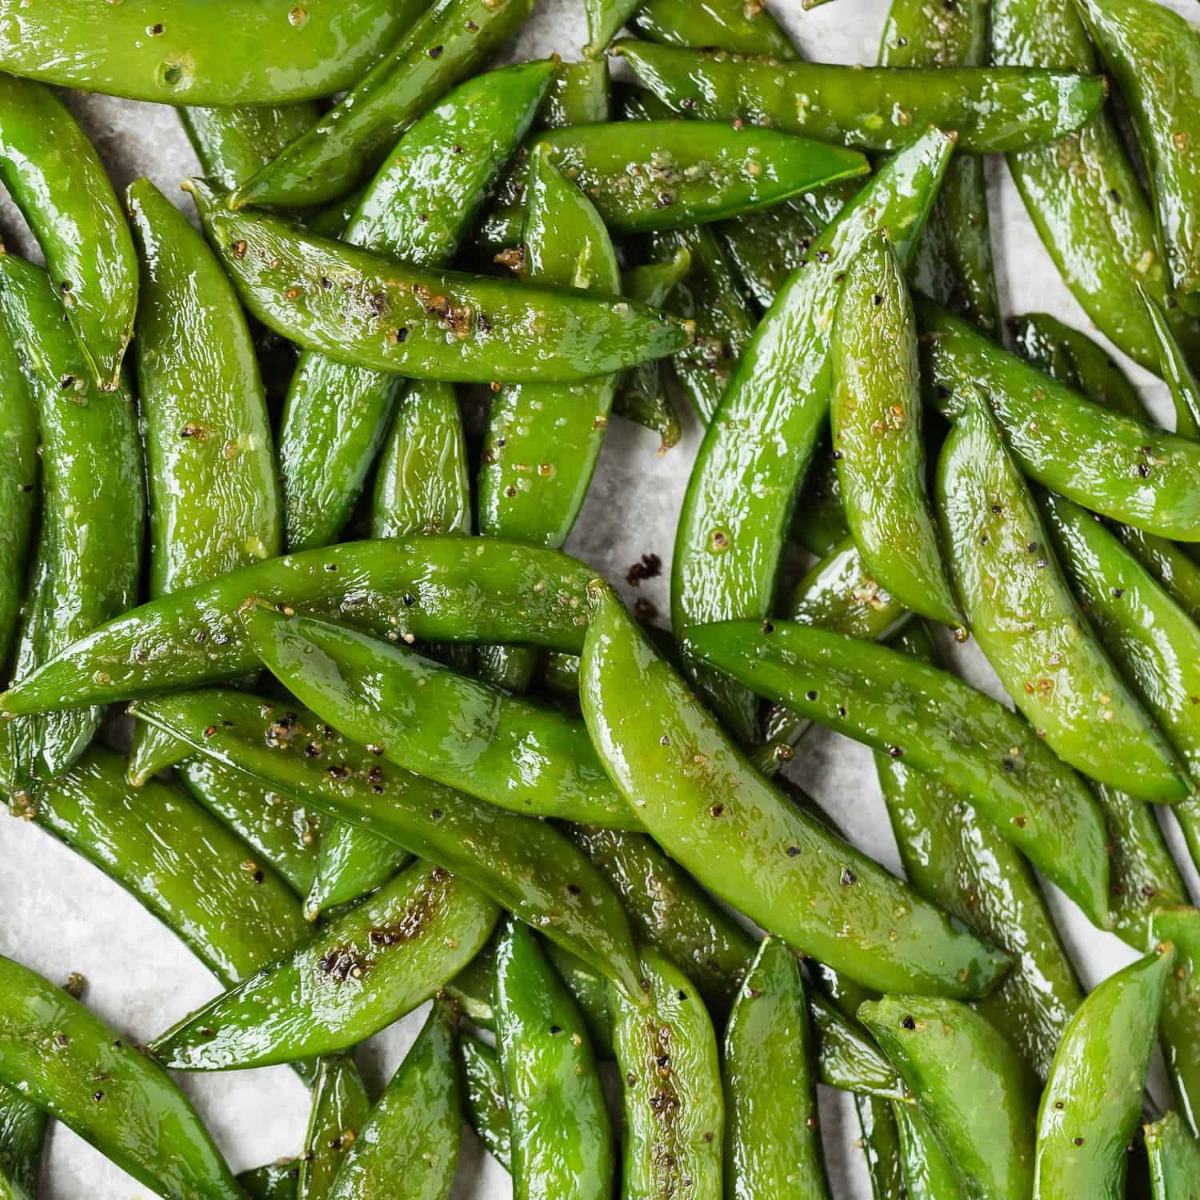 How To Store Sugar Snap Peas